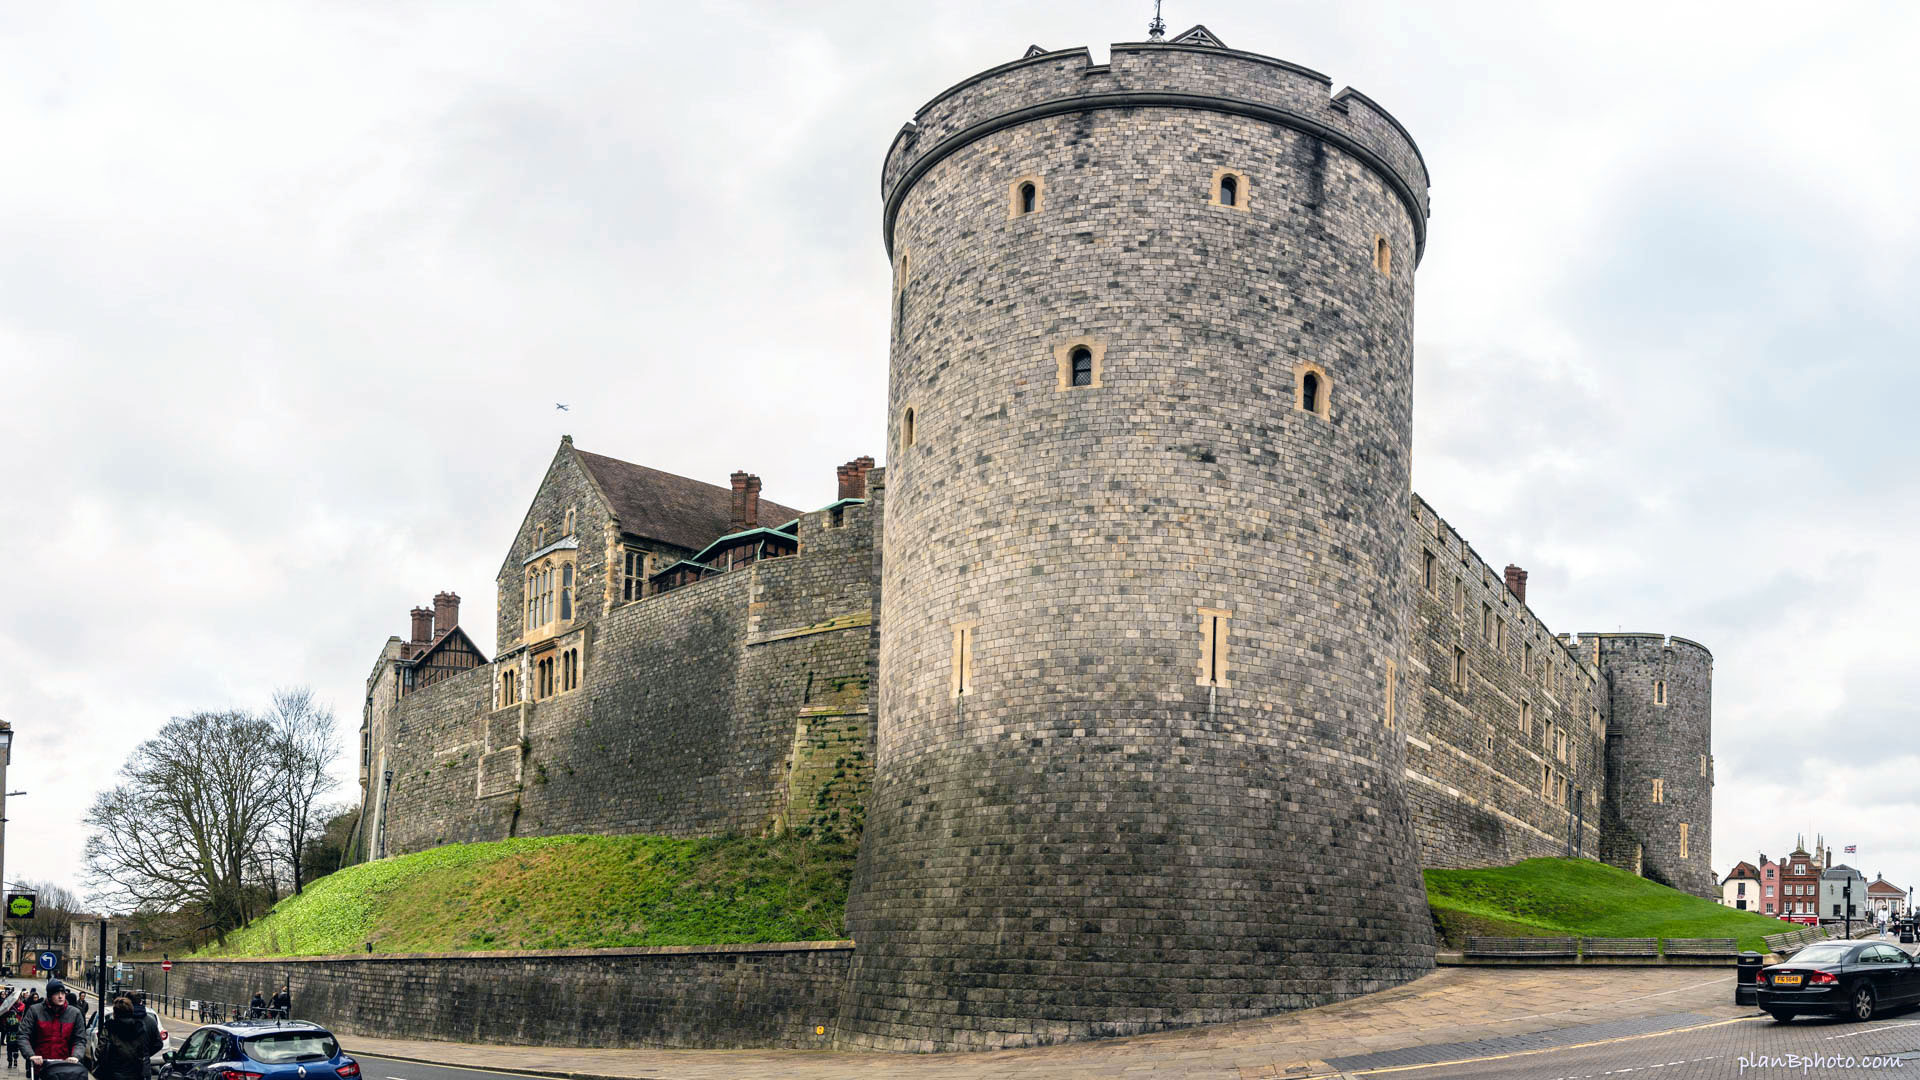 One of the towers of Windsor castle